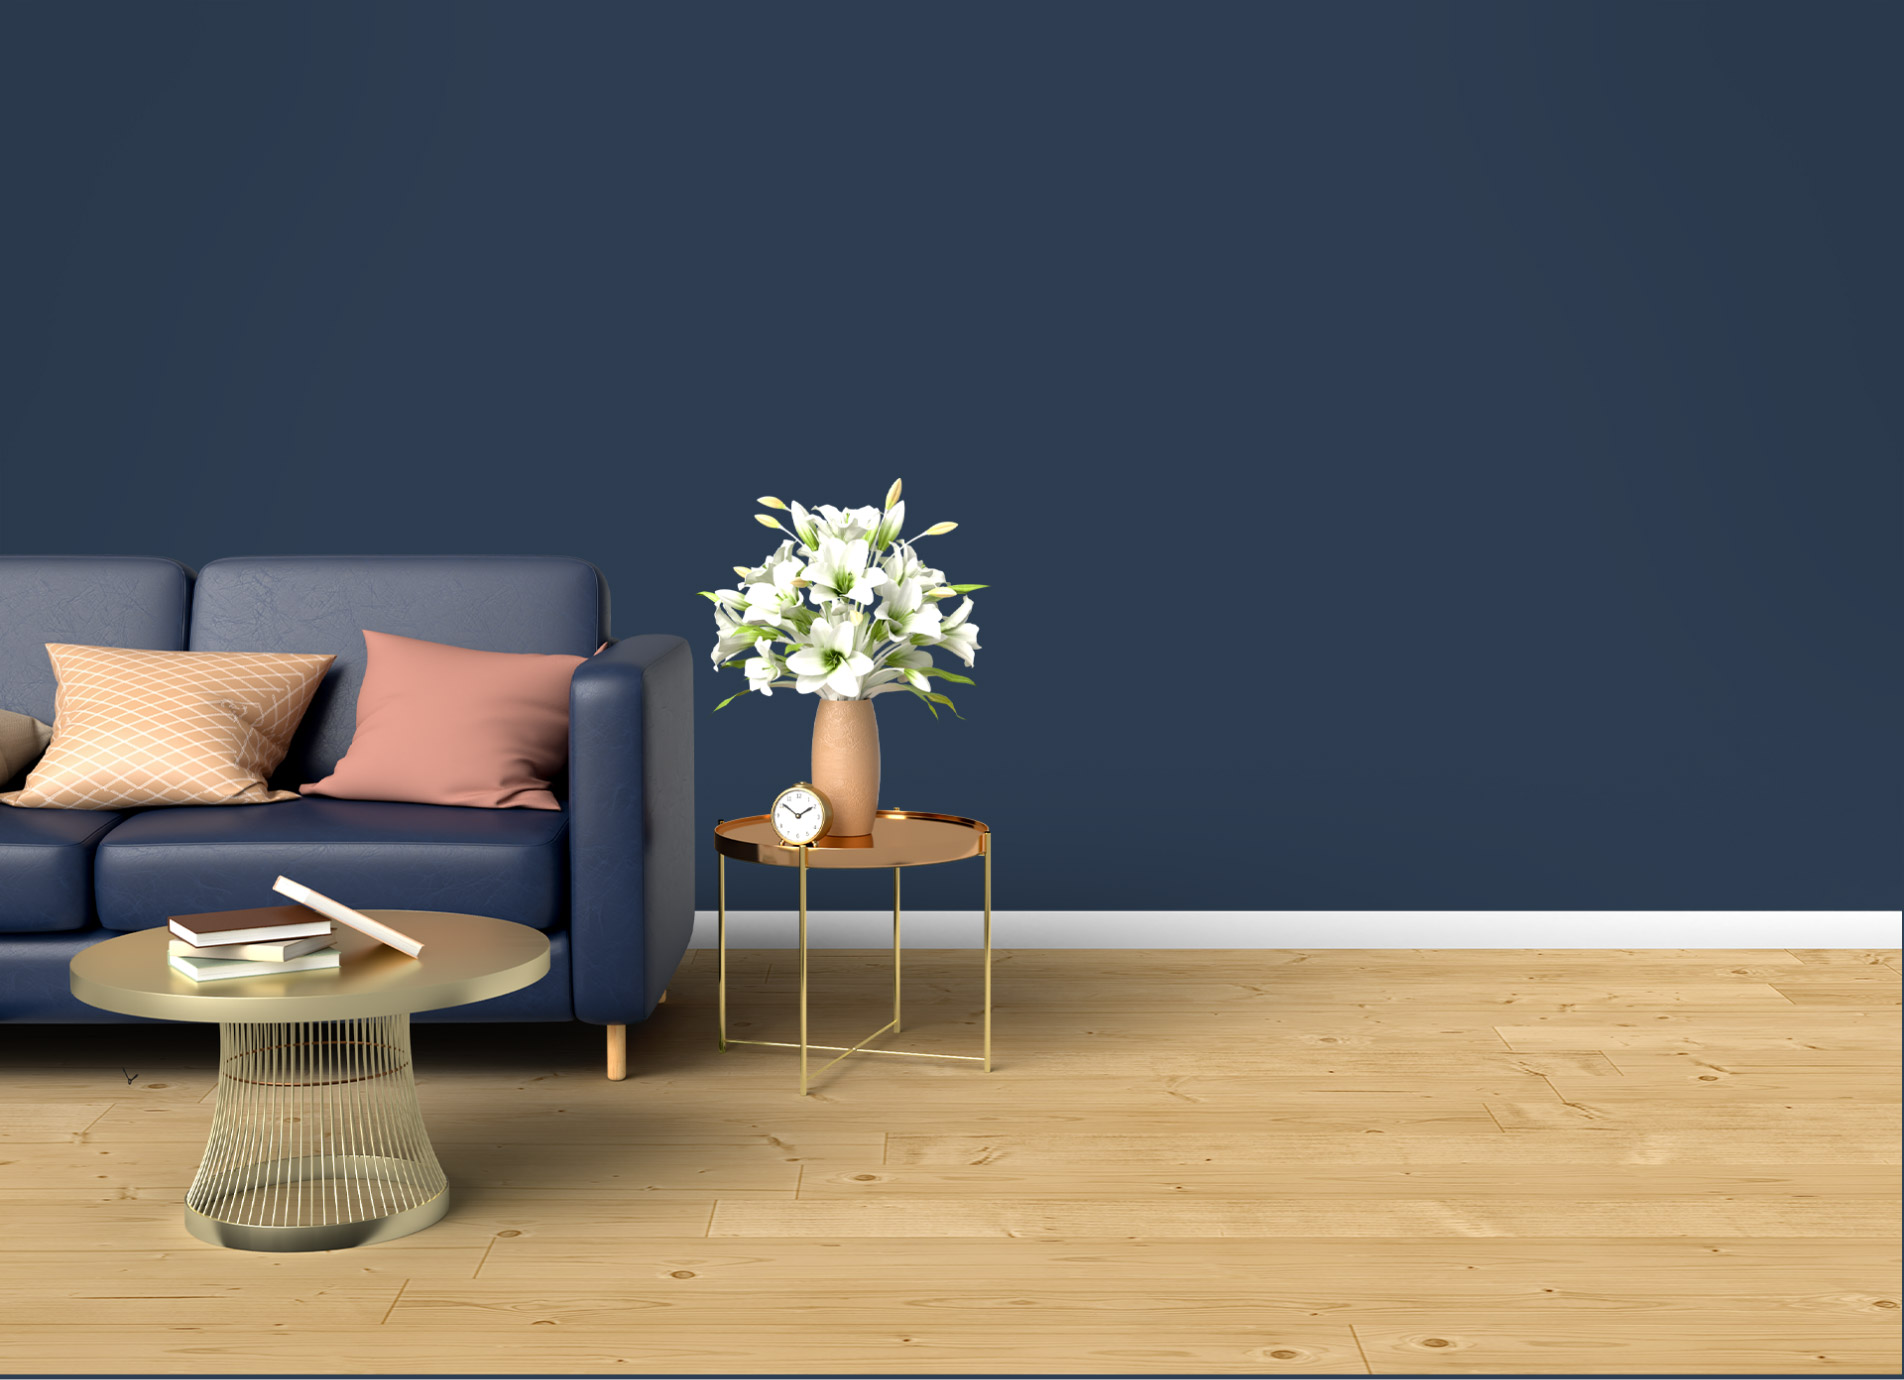 Oxford Blue 1800 Wall Paint Colors Any Color One Price